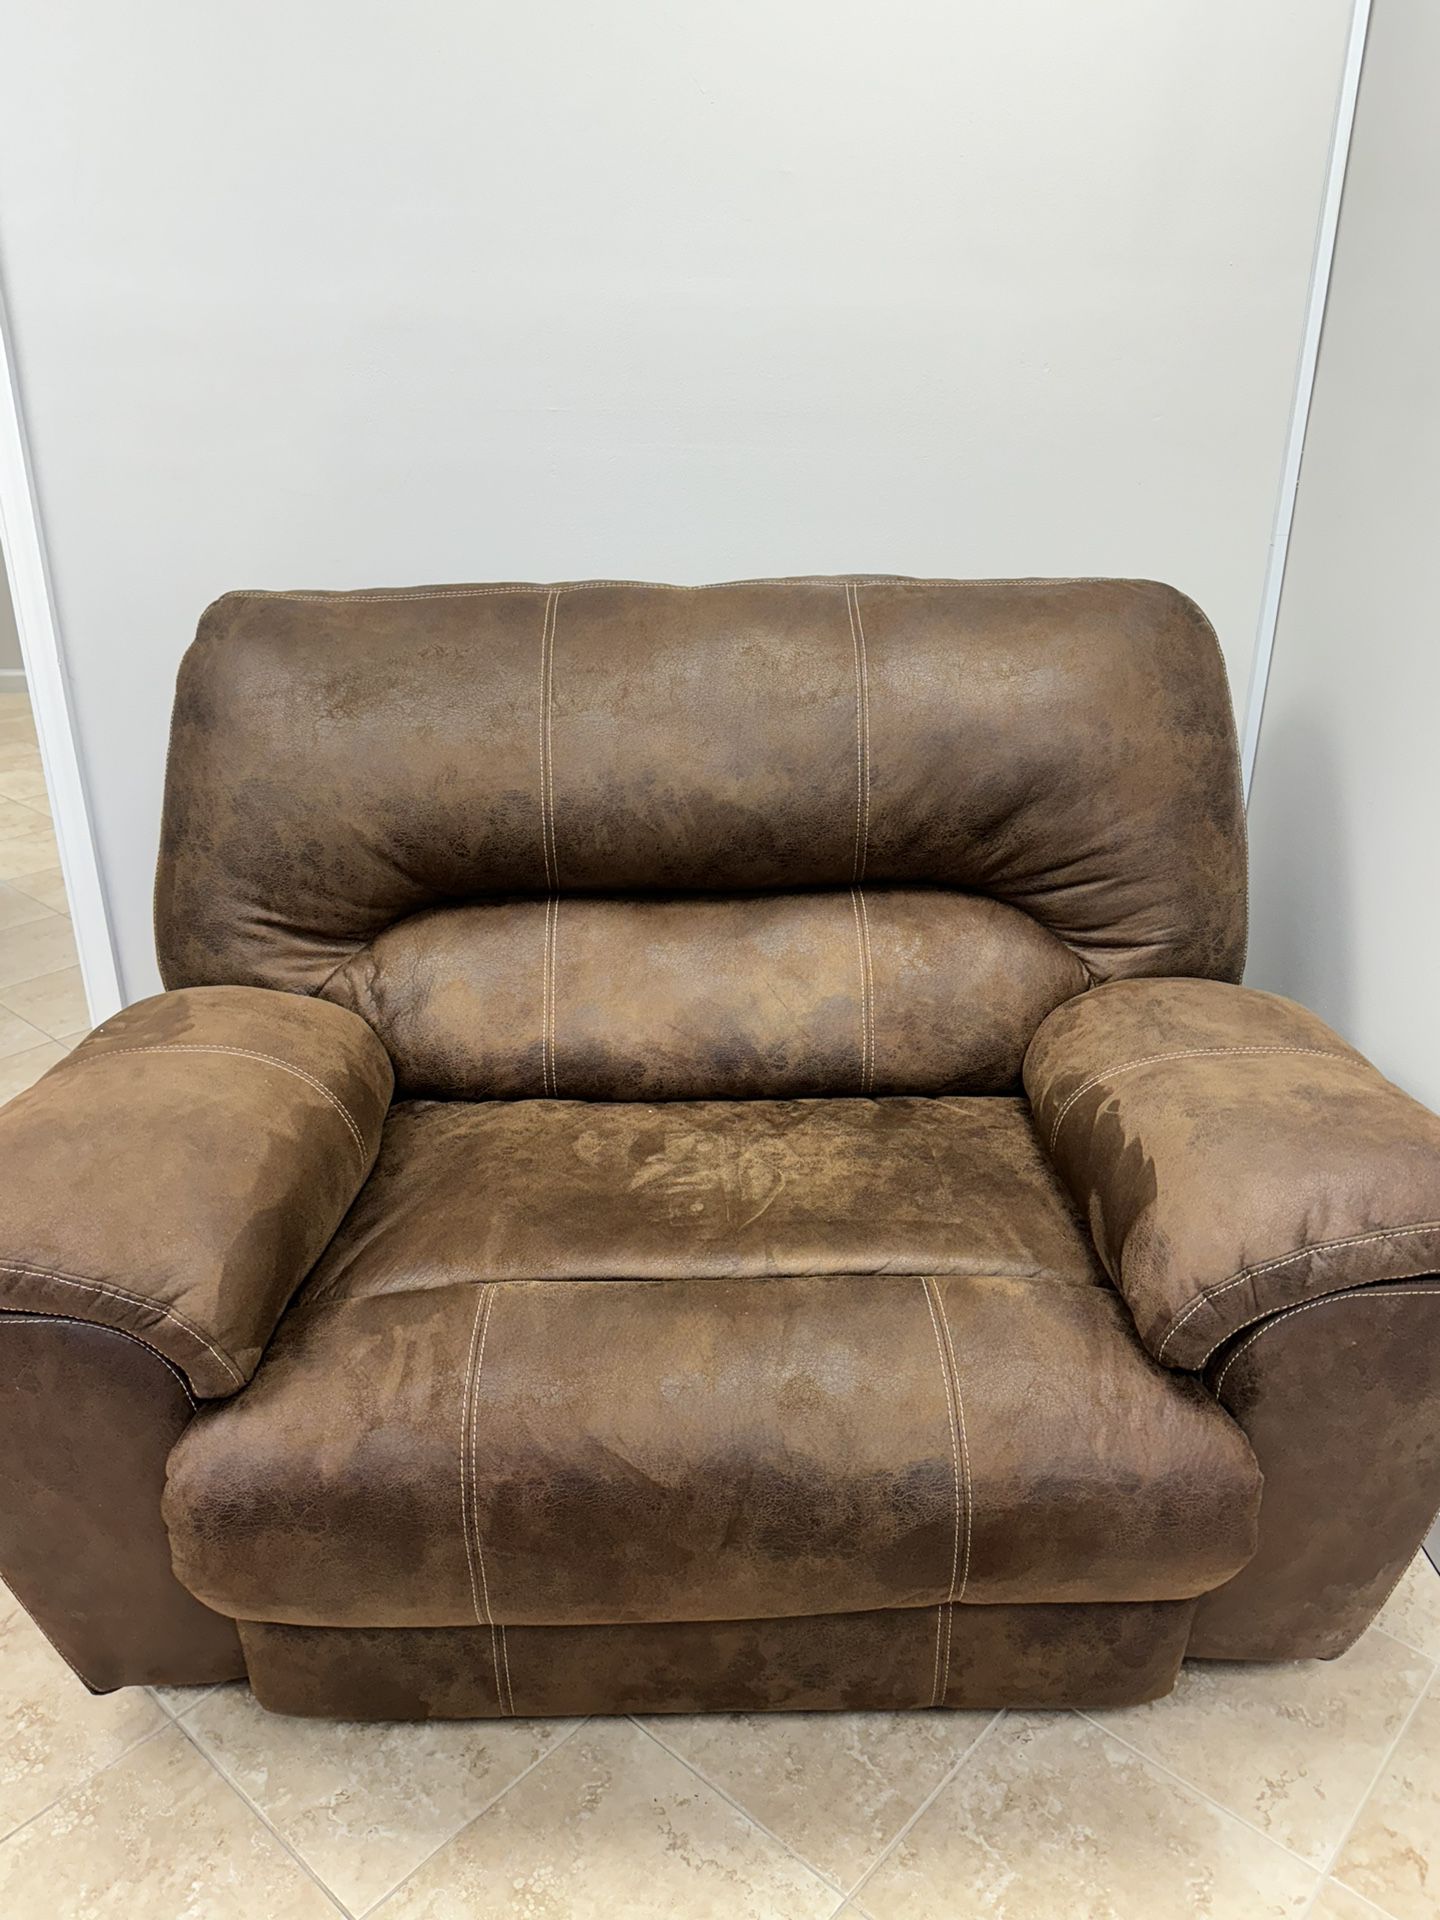 Large wide recliner FREE